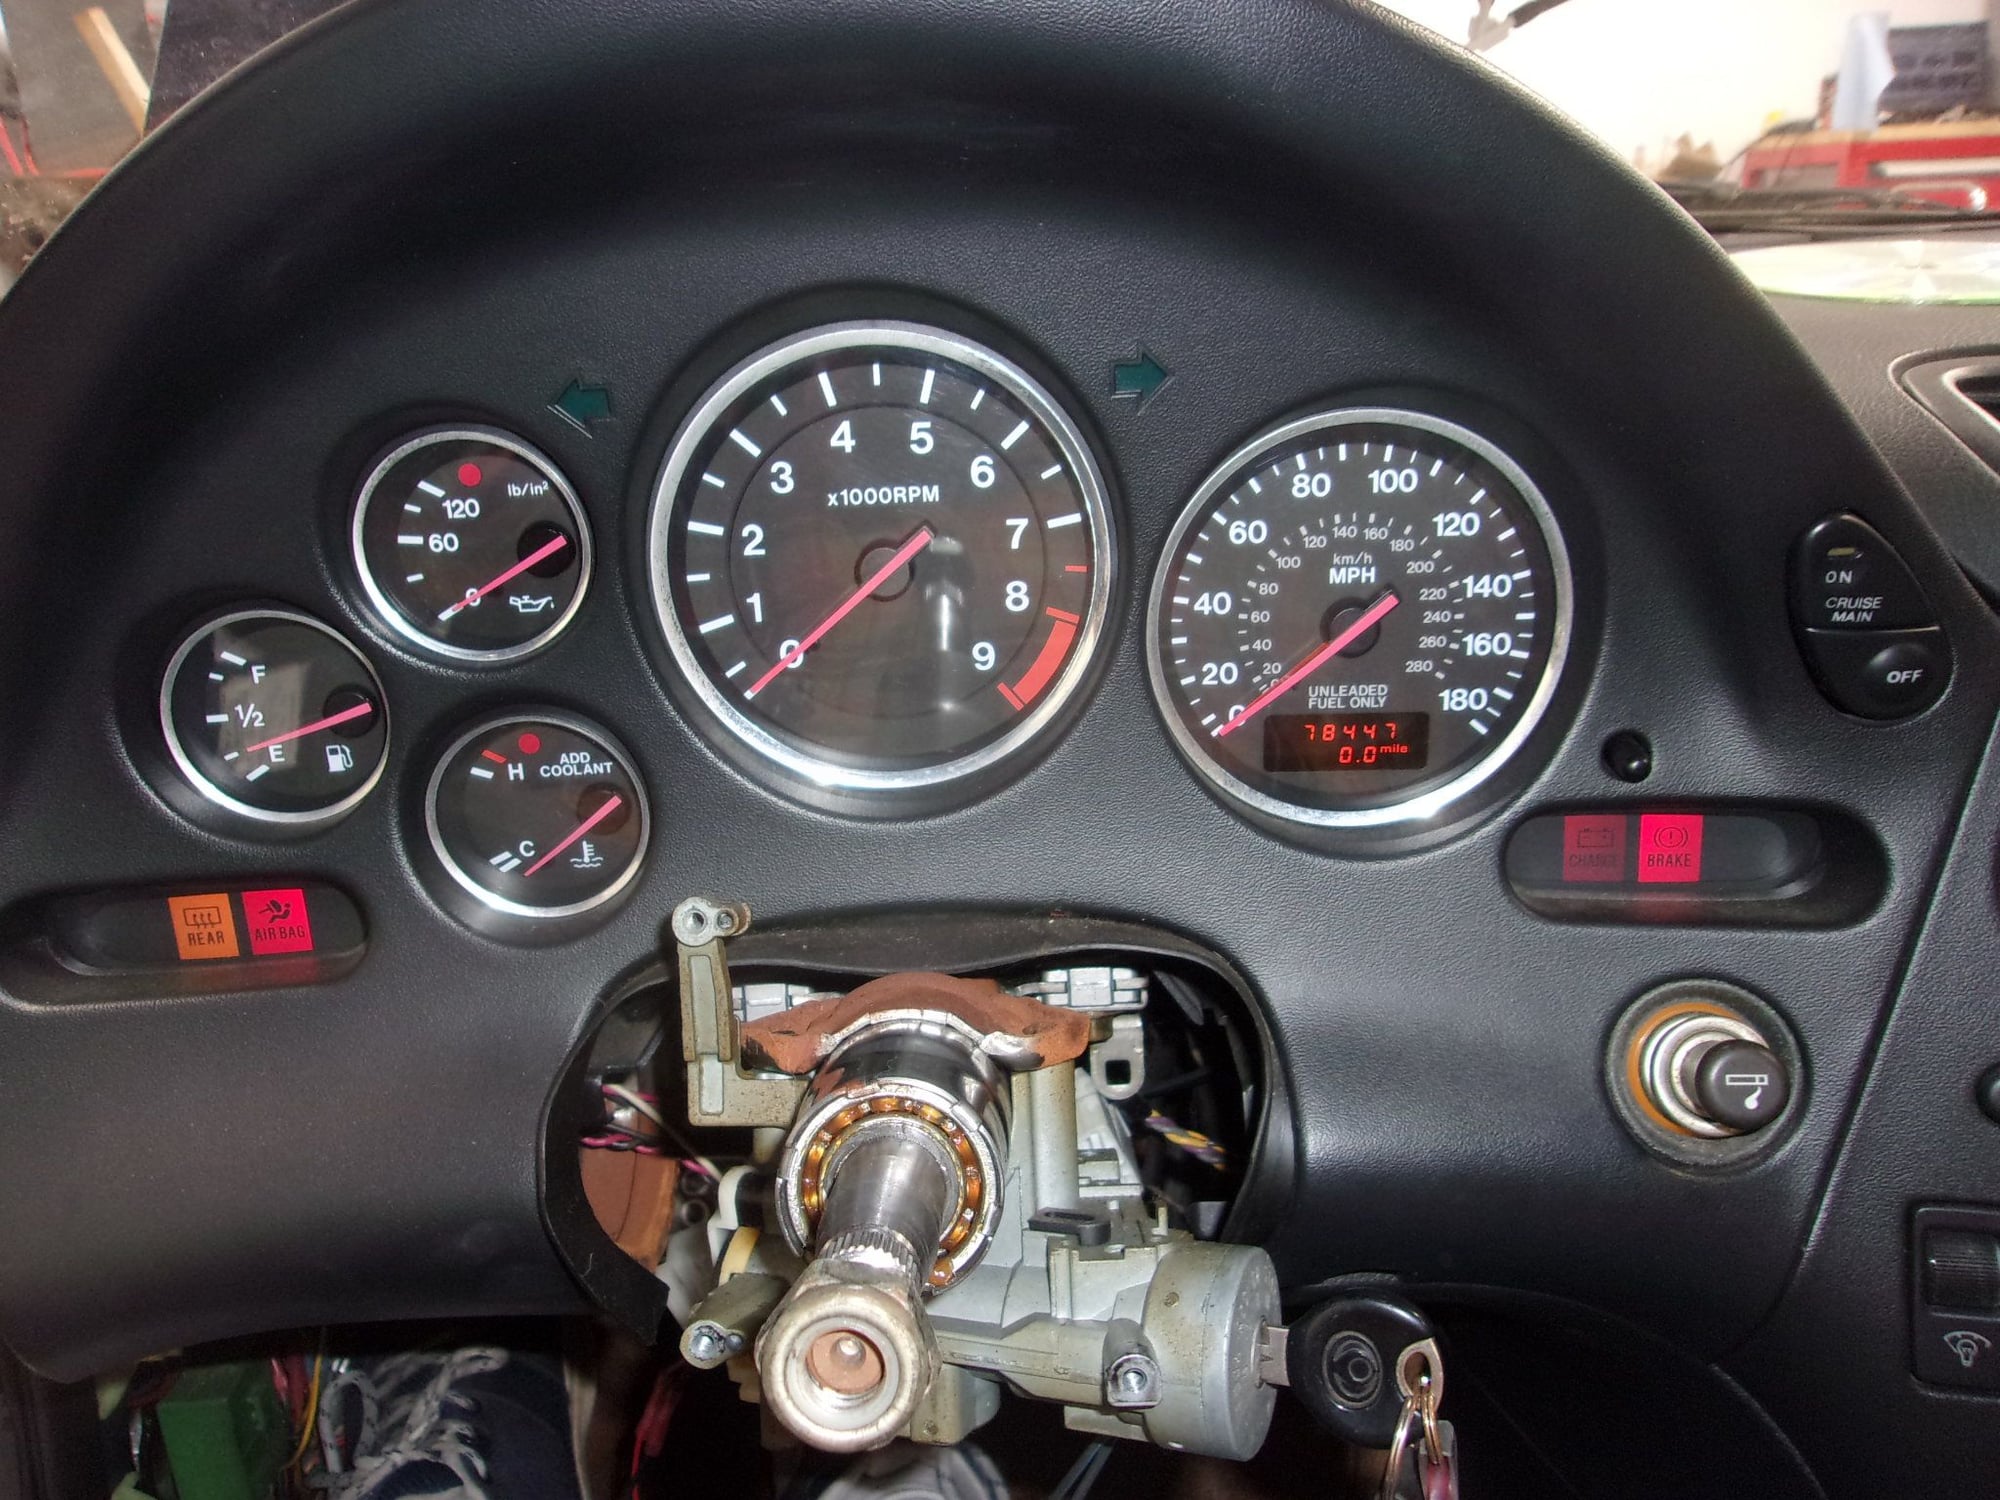 Interior/Upholstery - Mint '95 Meter hood/face/gauges - Used - 1994 to 1995 Mazda RX-7 - Murfreesboro, TN 37130, United States